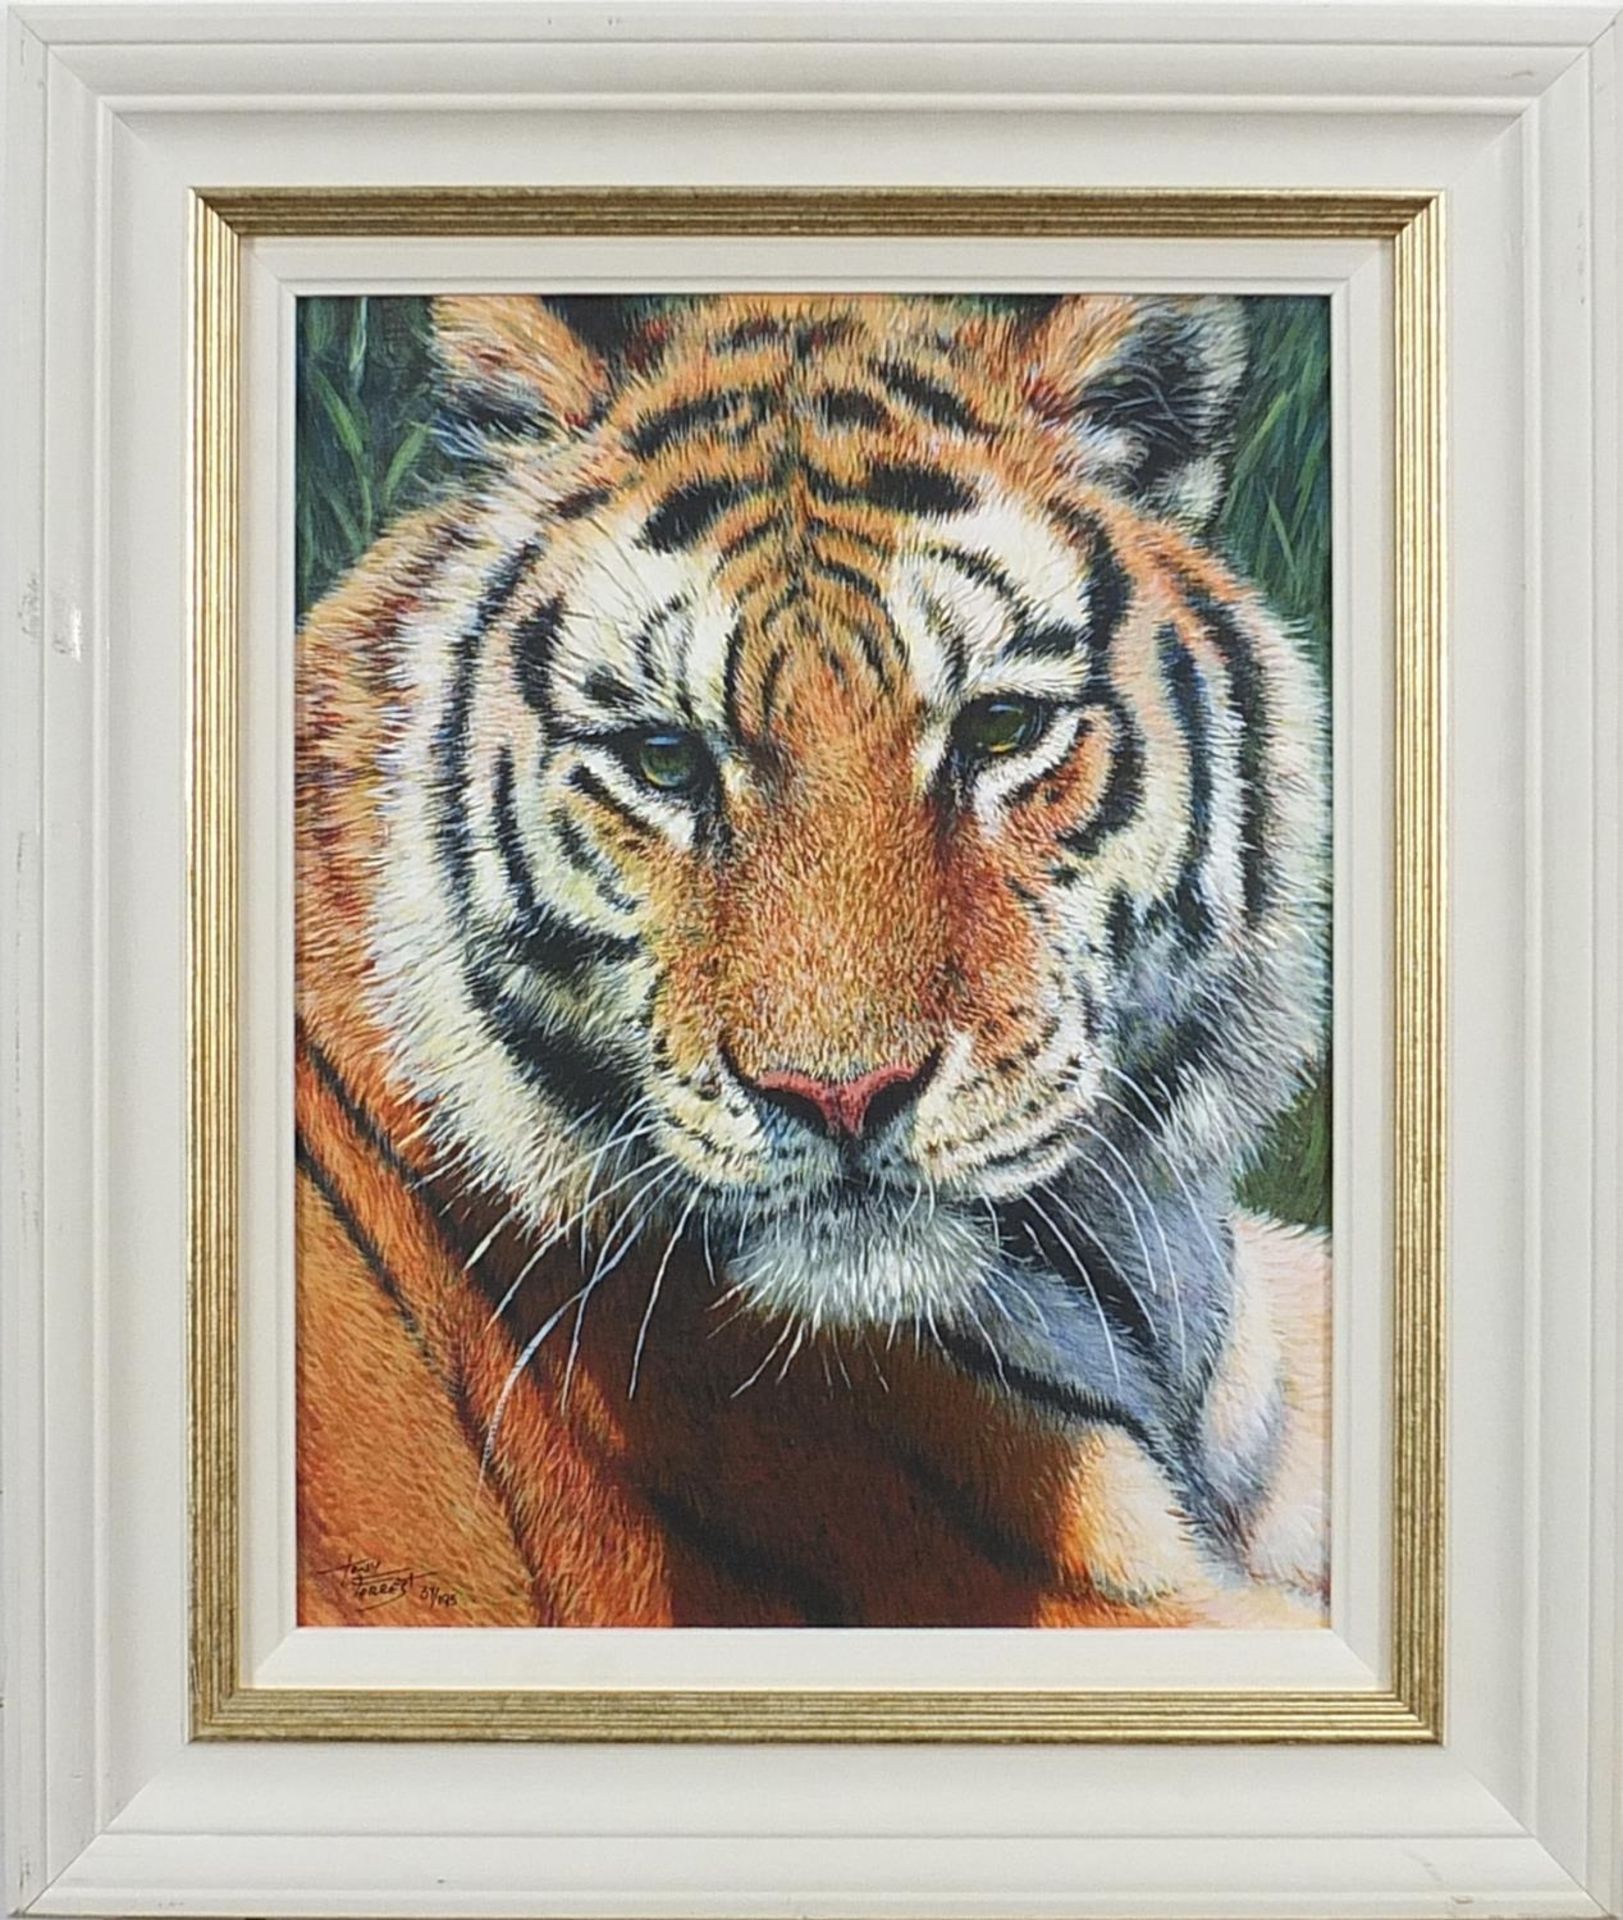 Tony Forrest - Wild Thing, tiger, print in colour on board, limited edition 59/195, certificate - Image 2 of 5